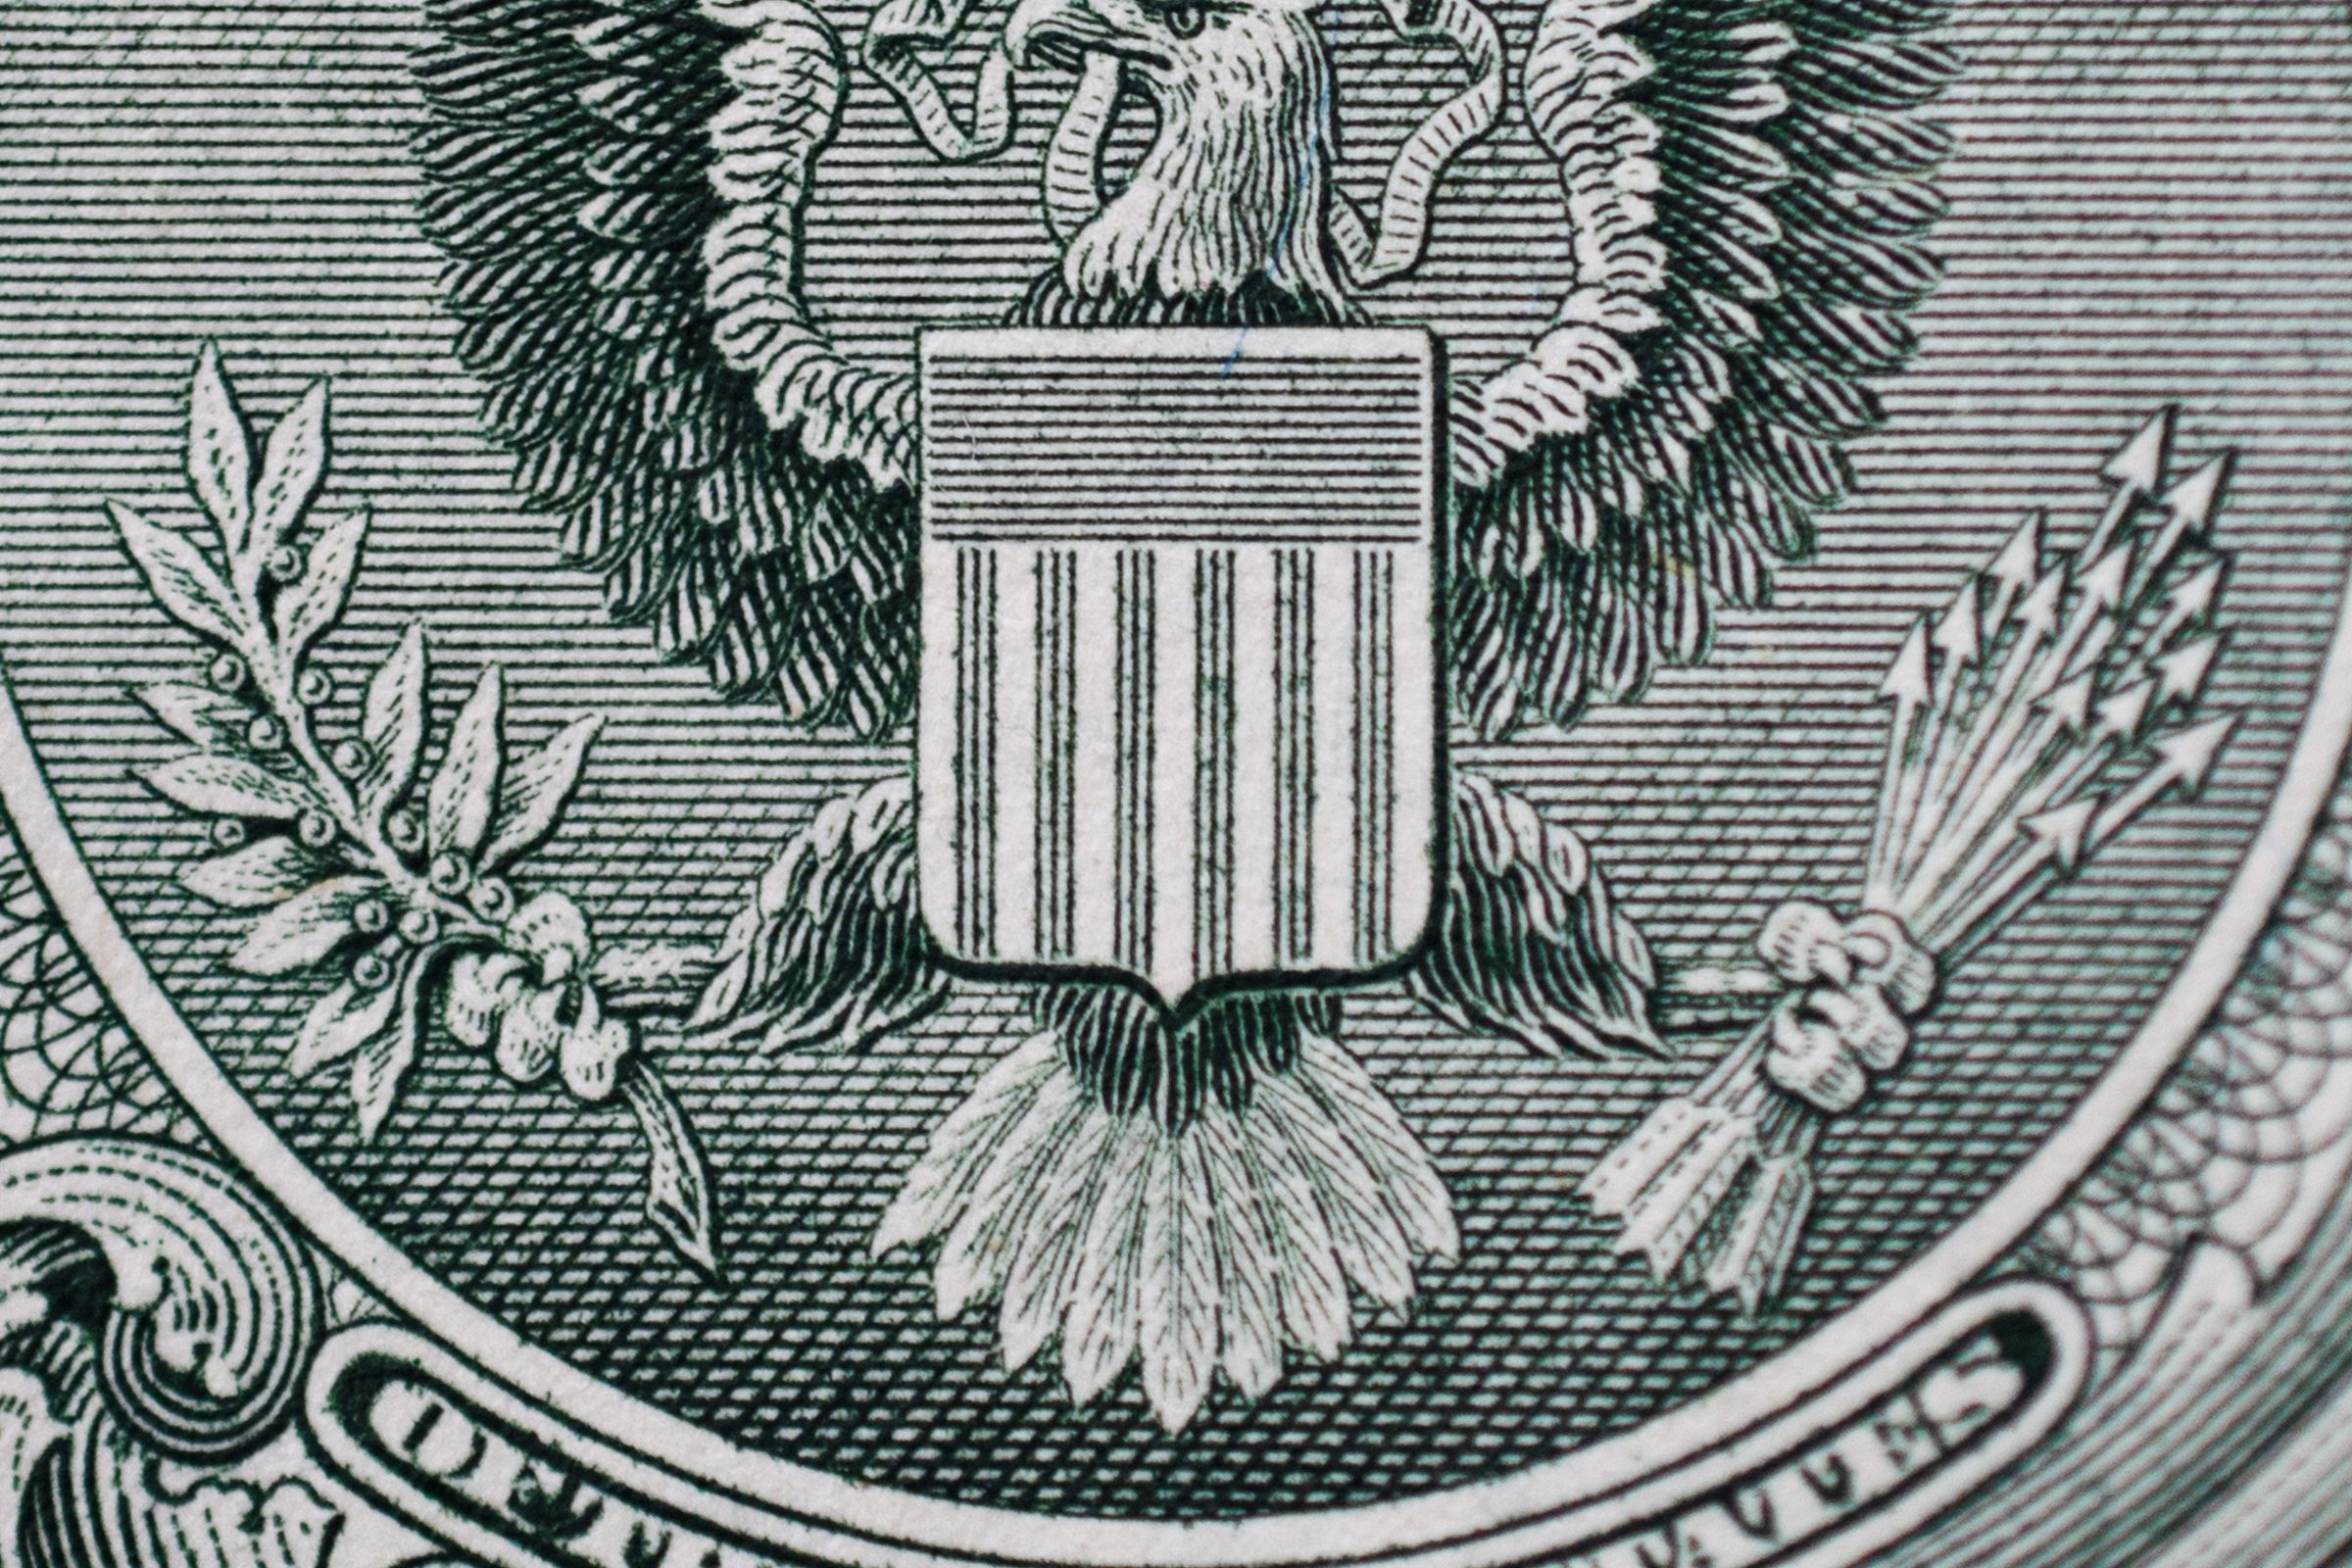 Dollar Bill Symbols: What They Mean